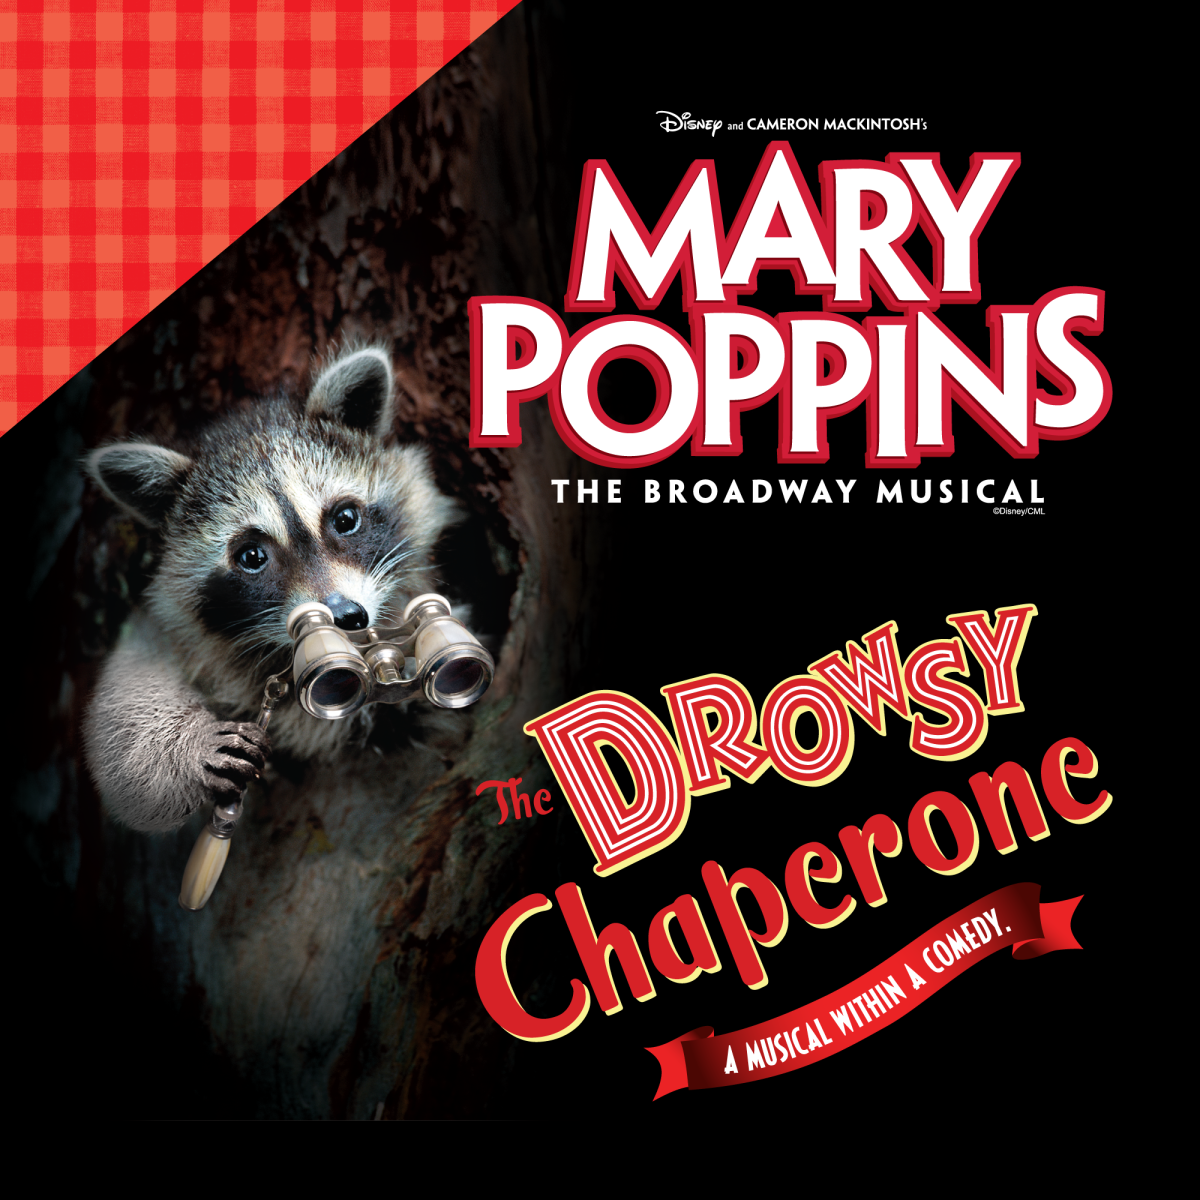 Theatre Under the Stars presents Mary Poppins and The Drowsy Chaperone – July 7 – August 19, 2017 - image